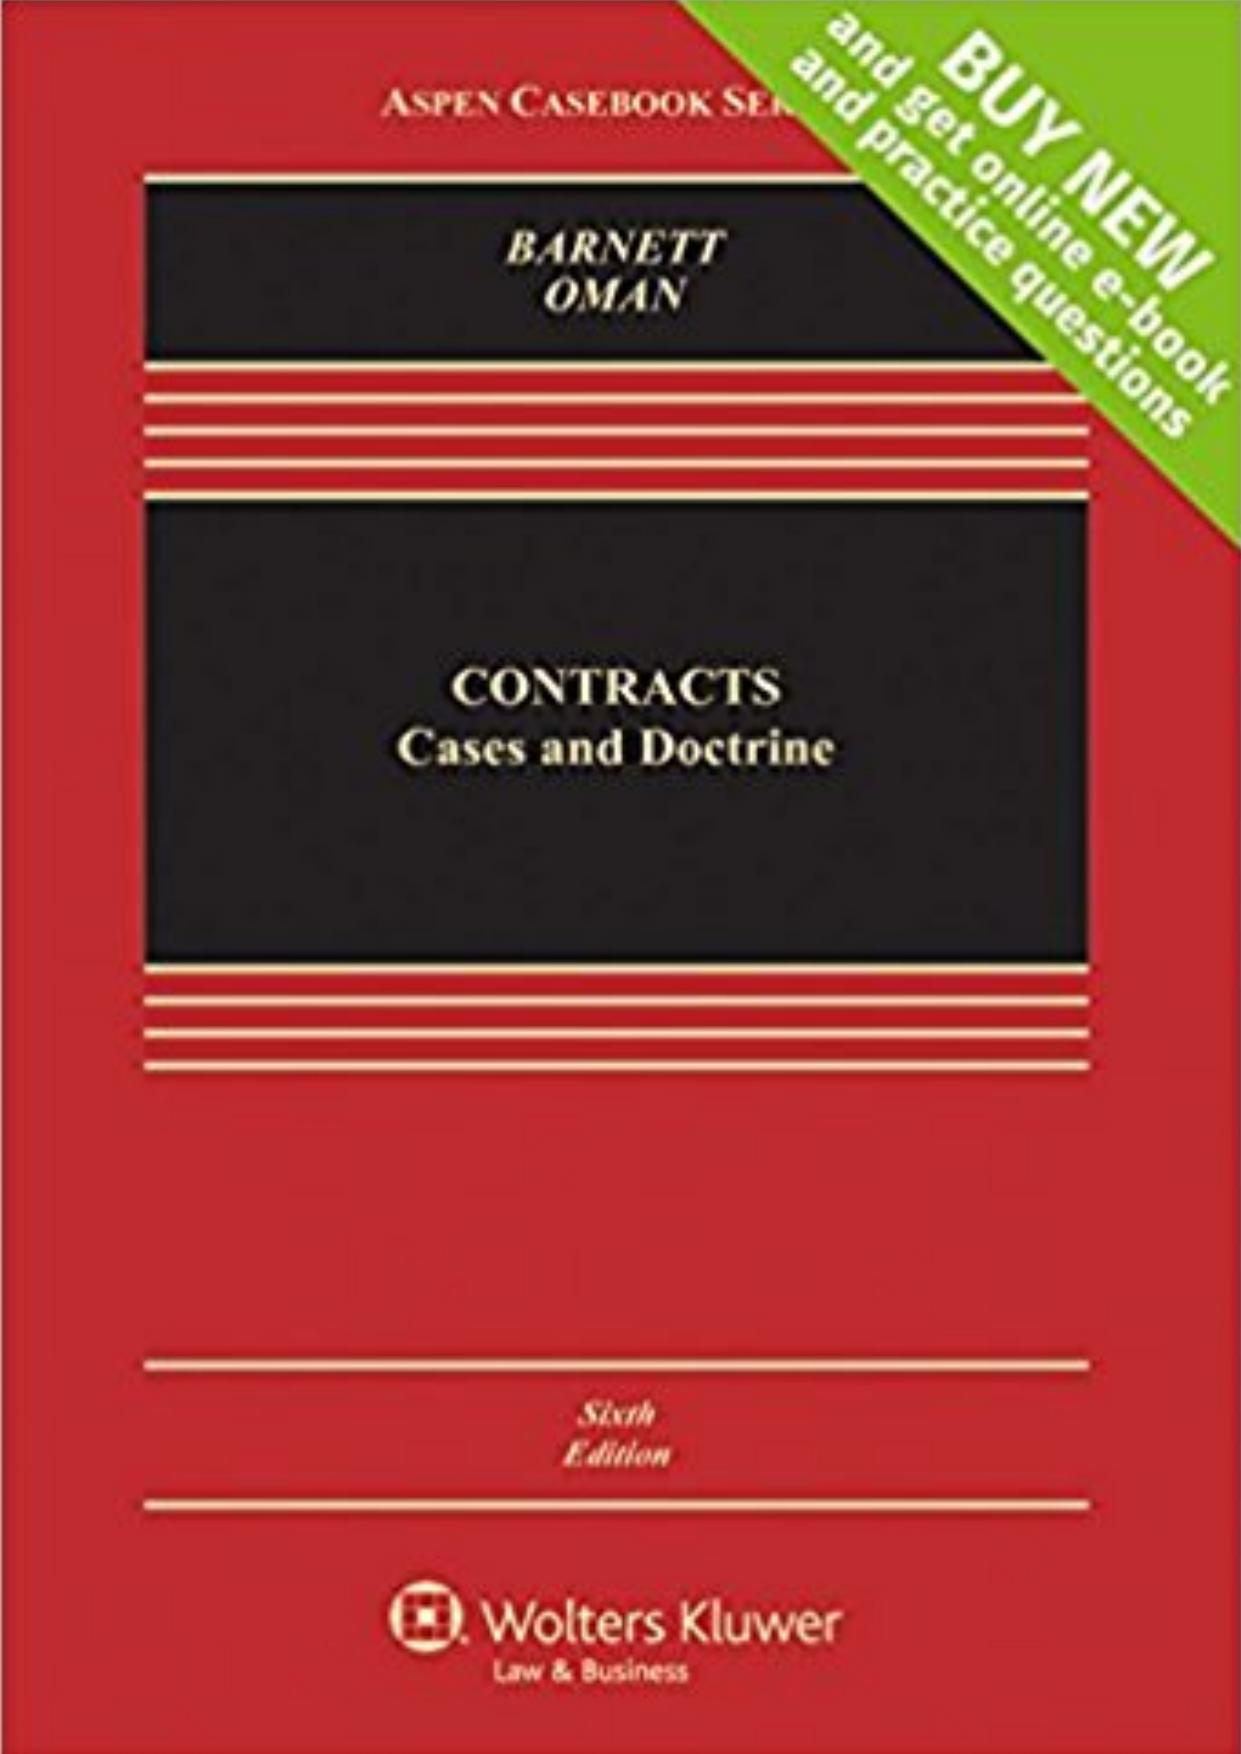 Contracts Cases and Doctrine 6th Edition (Aspen Casebook Series).jpg